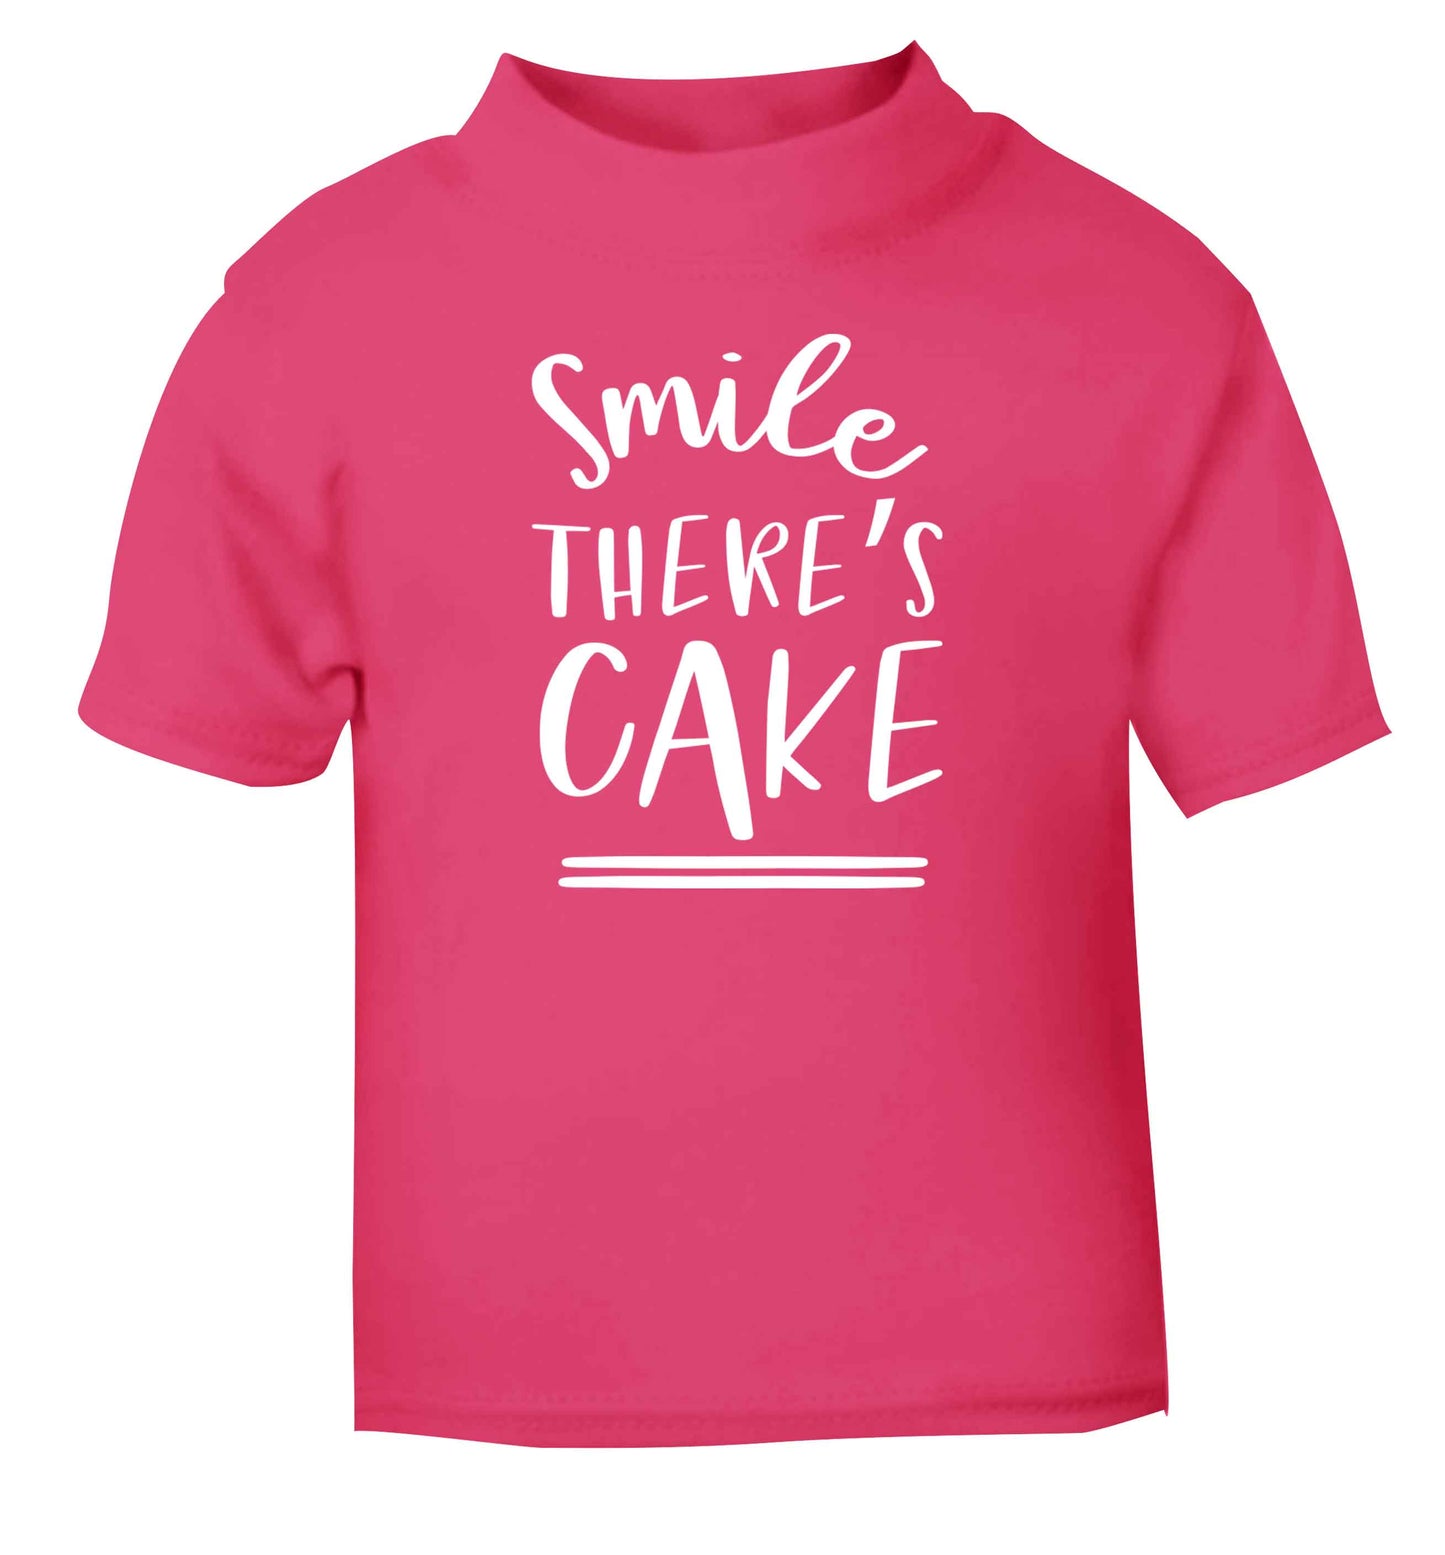 Smile there's cake pink Baby Toddler Tshirt 2 Years